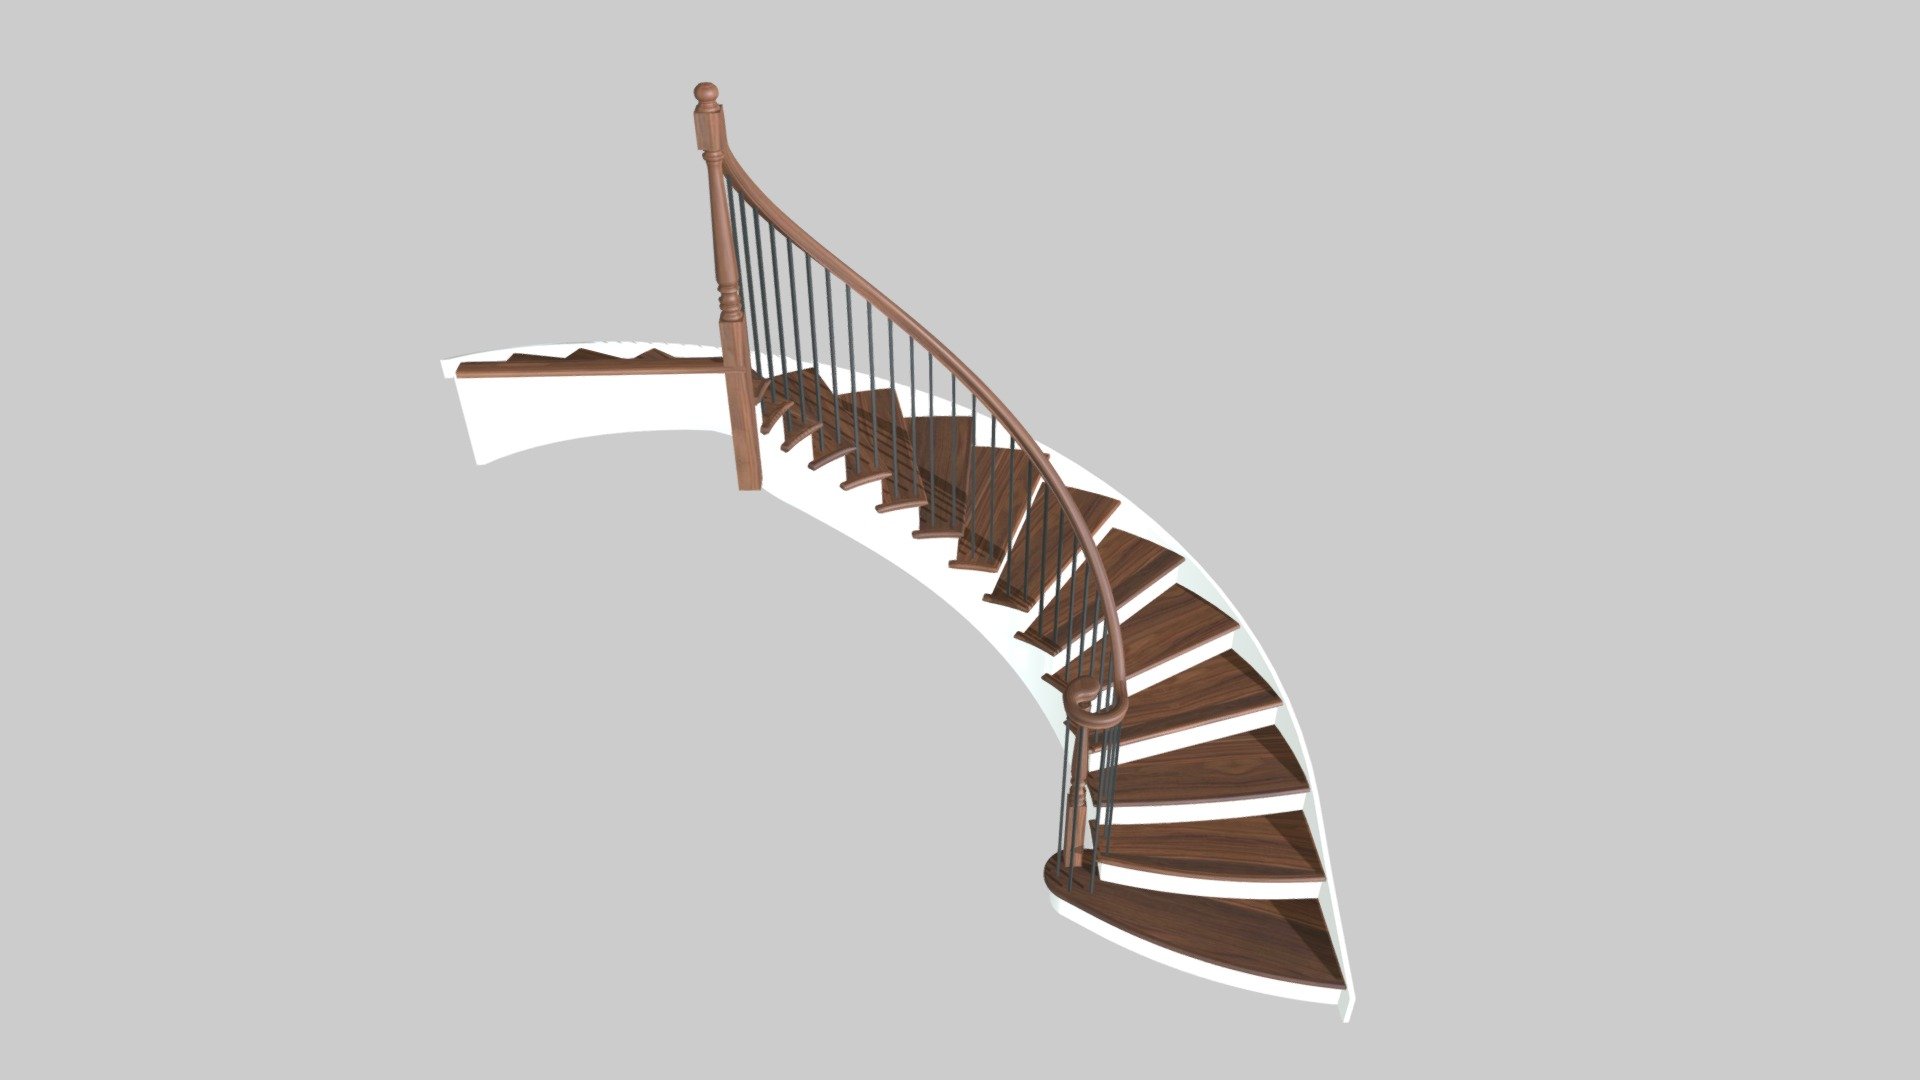 Circular stair - 180 degree with bowed treads